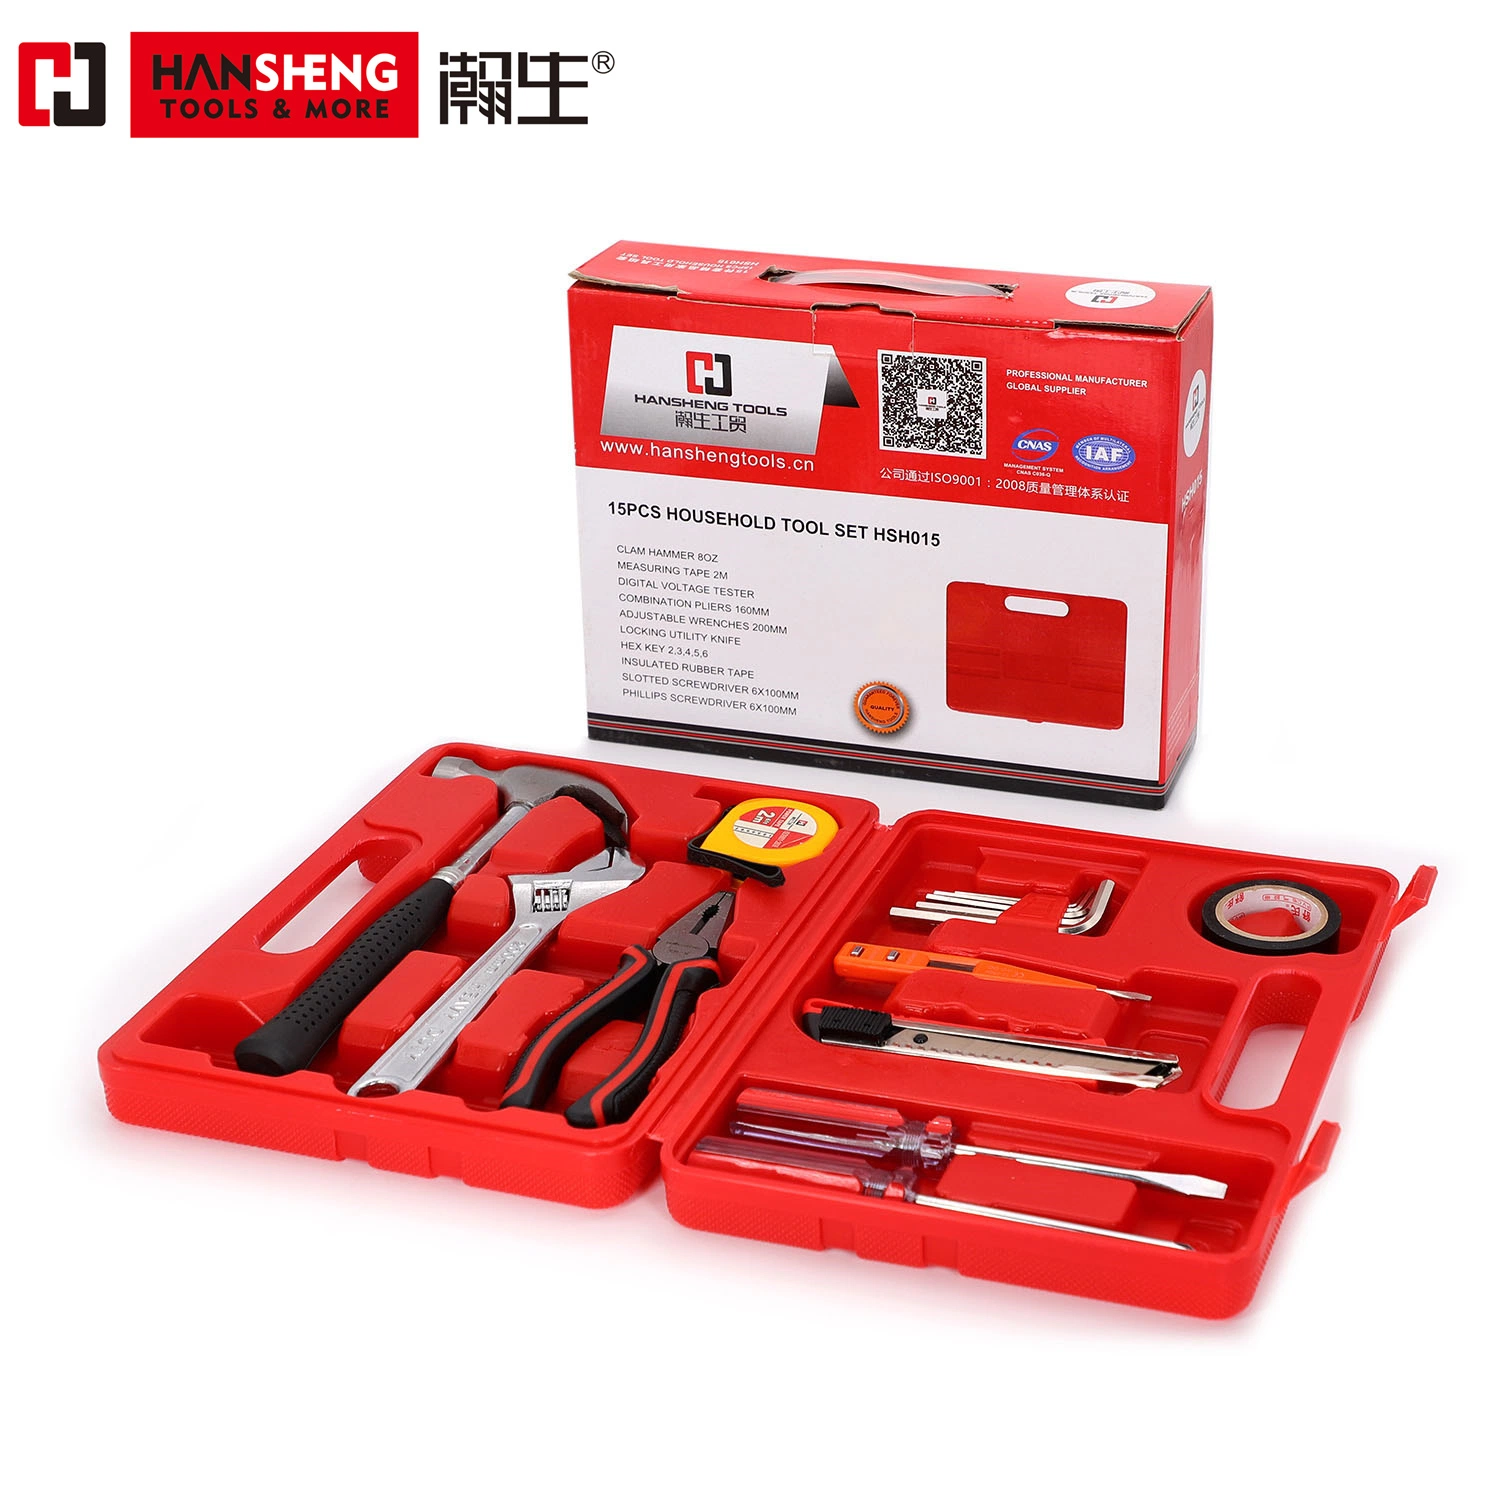 Professional Household Set Tools, Hand Tool, Hardware Tools, Plastic Toolbox, Combination, Set, Gift Tools, Pliers, Wire Clamp, Hammer, Wrench, Snips, 8 Set